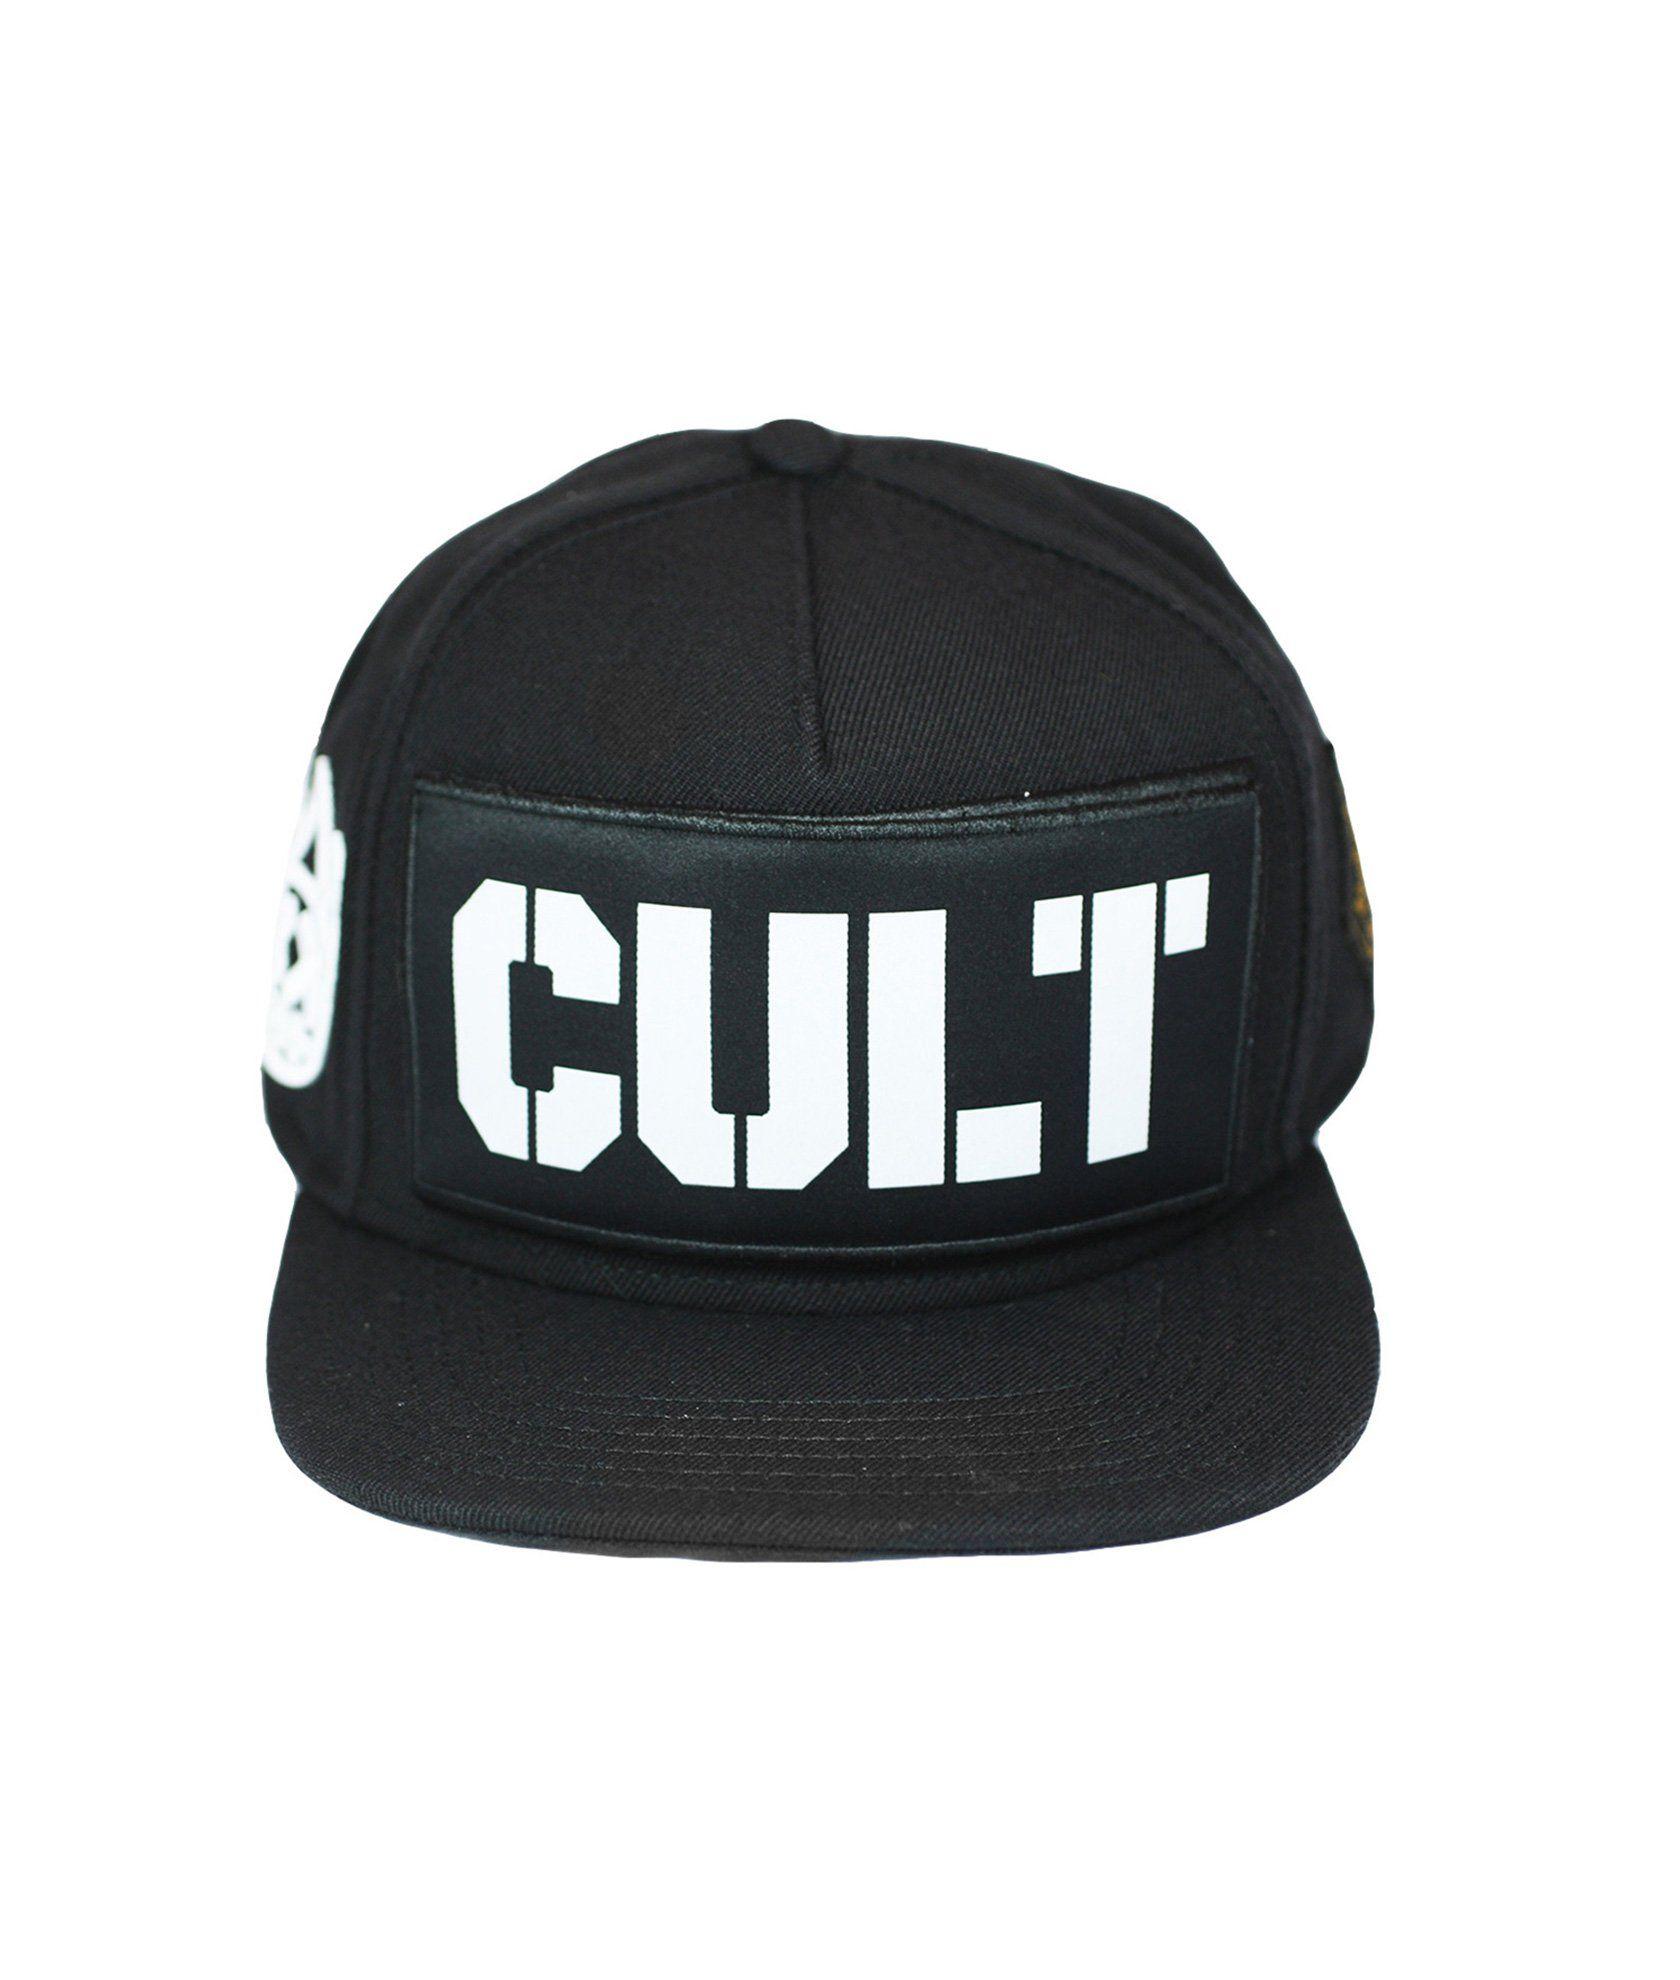 Velcro Logo - Cult Of IndividualityCult Black Hat EPIC Velcro Logo 5 Panel